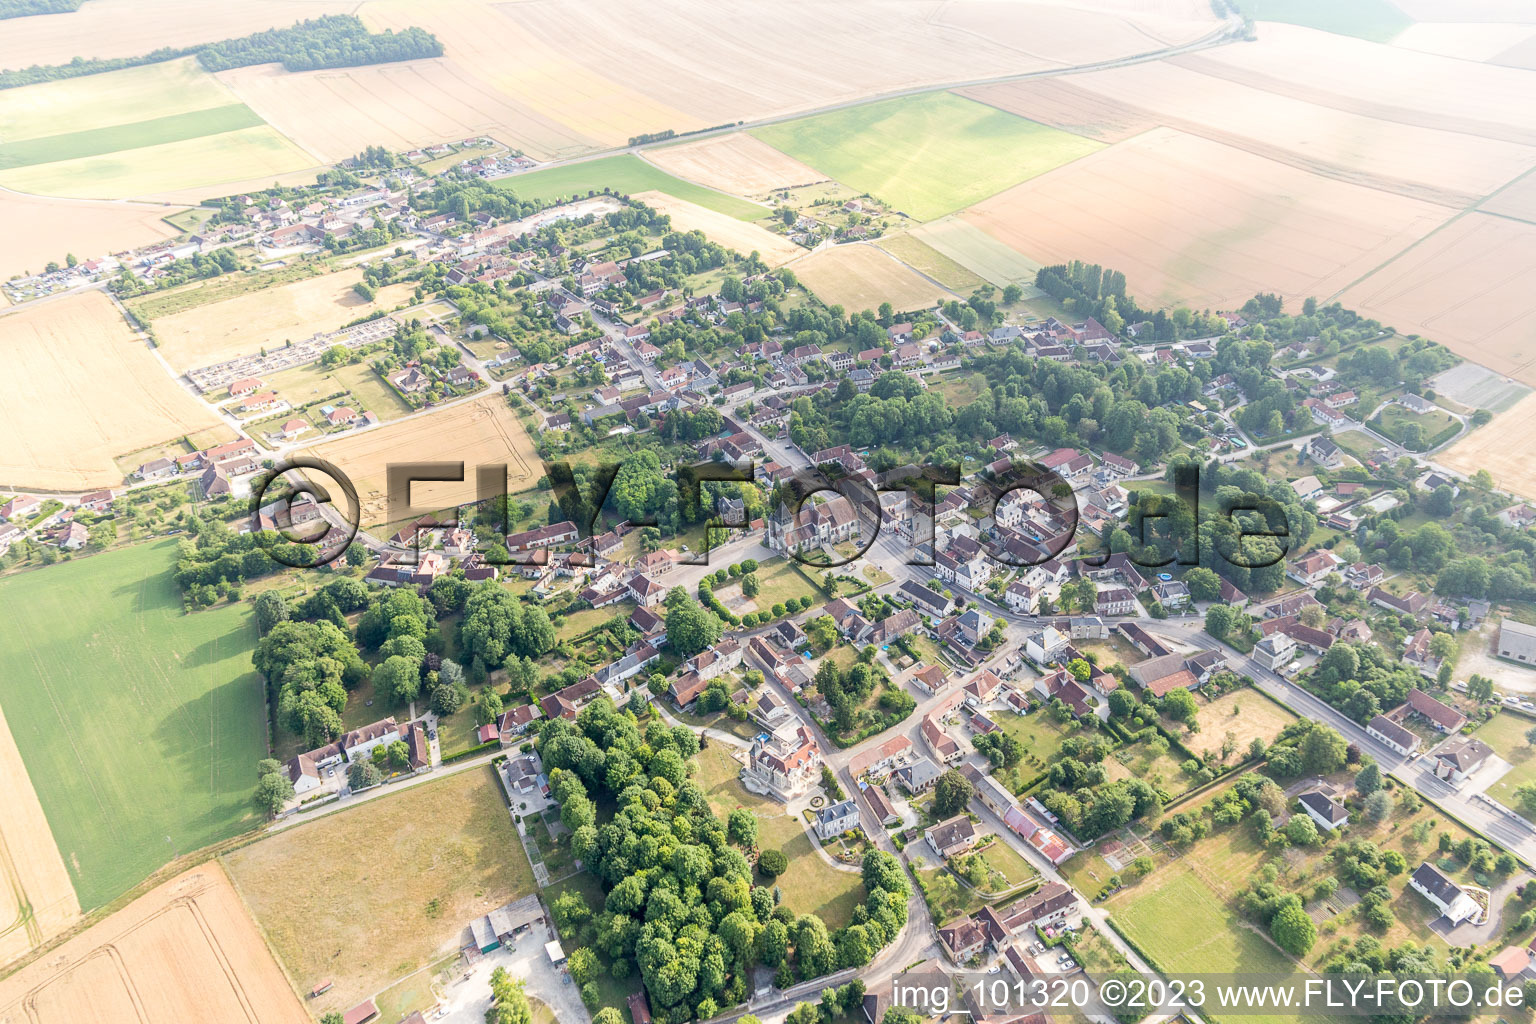 Aerial view of Auxon in the state Aube, France